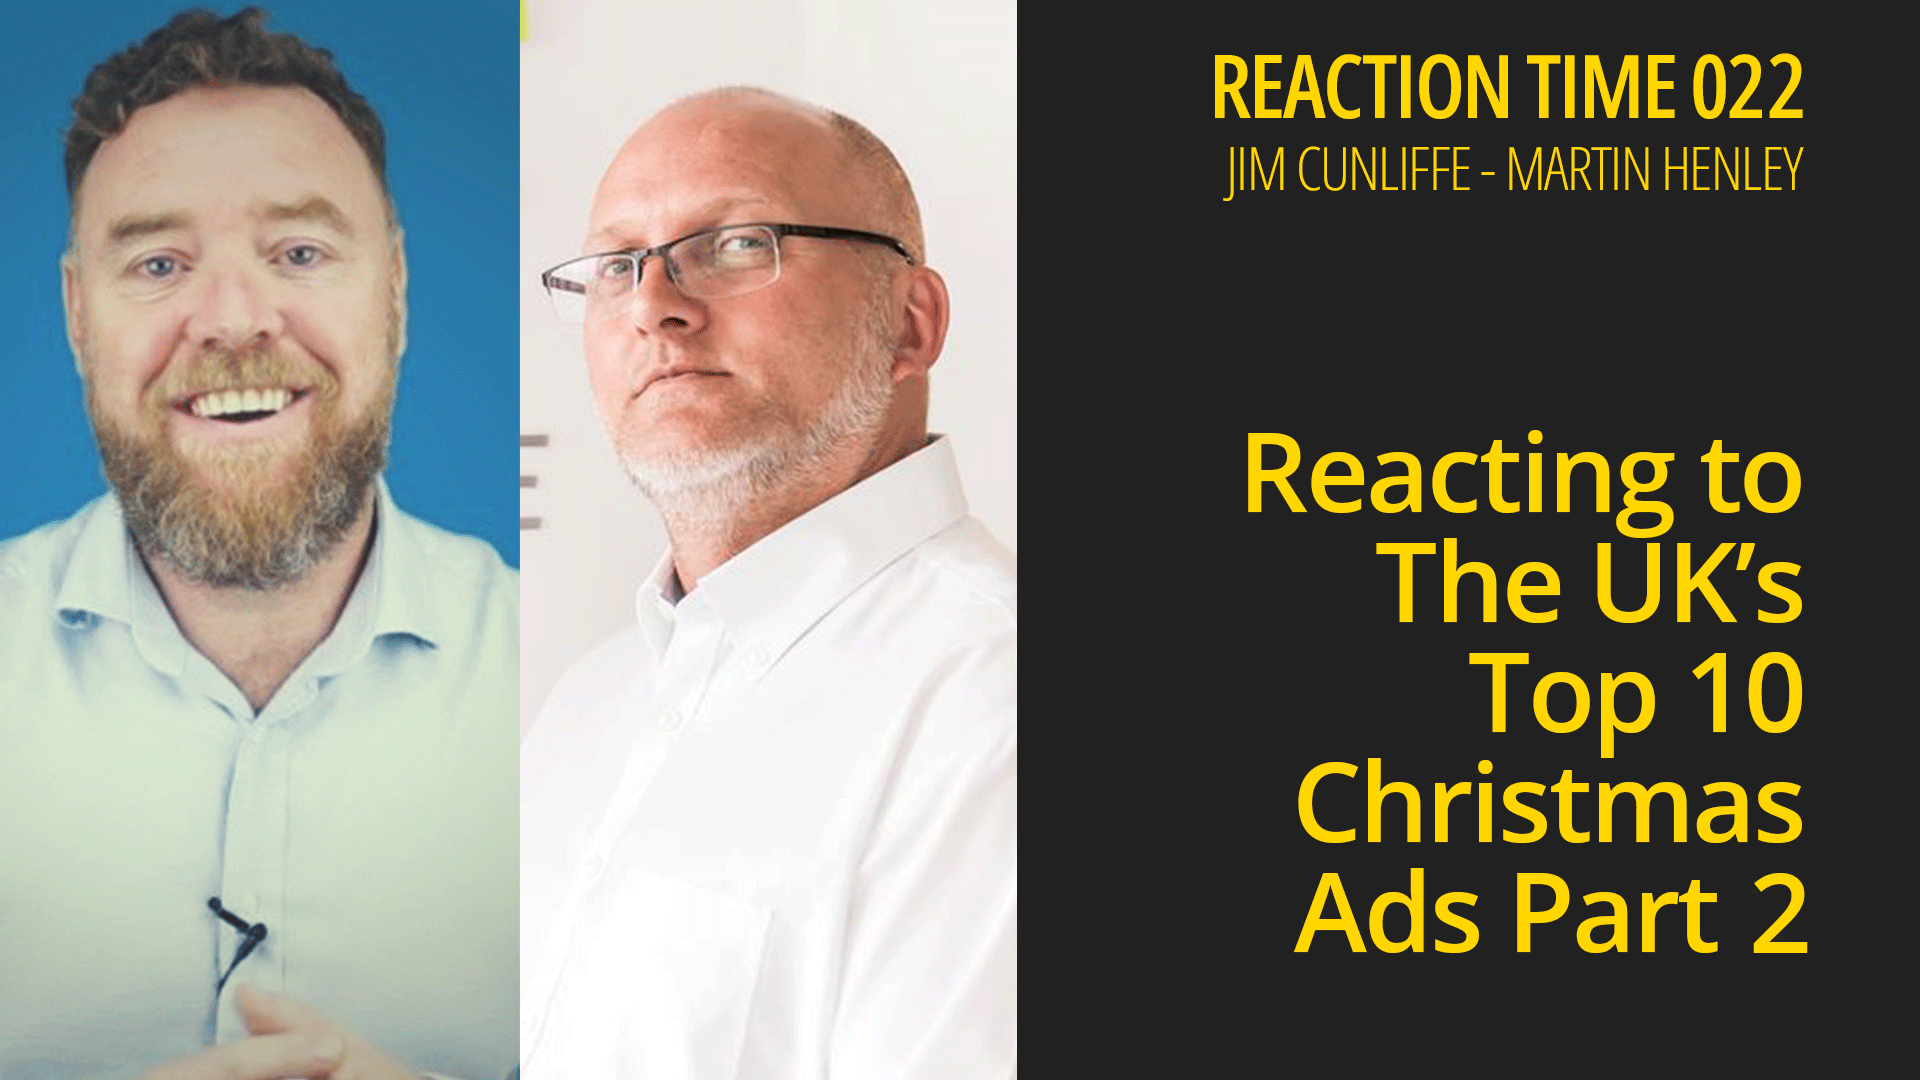 Reacting to The UK’s Top 10 Christmas Ads Part 2 – Reaction Time 022